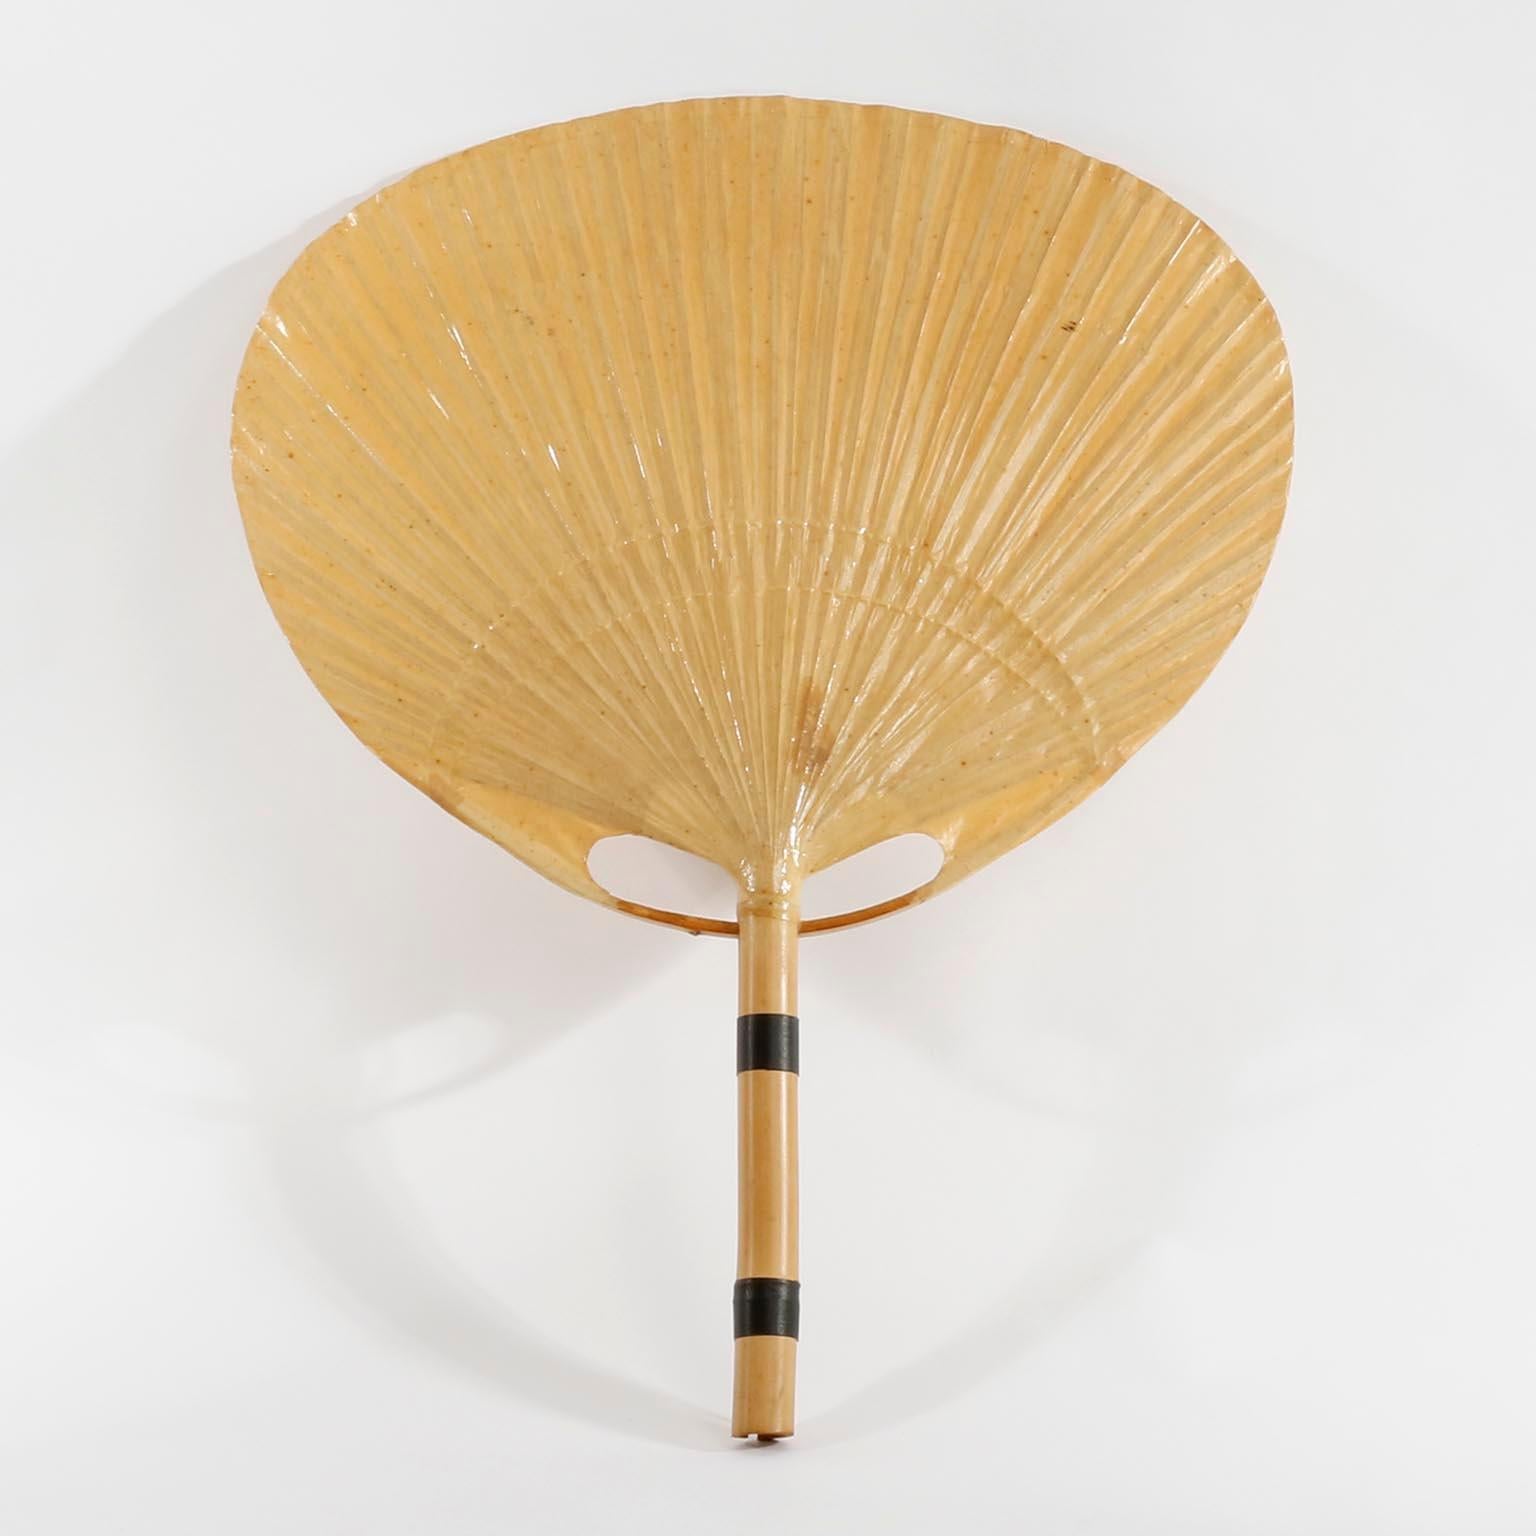 A pair of ‘Uchiwa’ wall light fixtures with large rice paper palm shaped leaves connected to a bamboo shaft by Ingo Maurer, Germany, 1970s.
This lamps were handmade of bamboo and Japanese rice paper in 1977.
Ingo Maurer’s interest in paper for